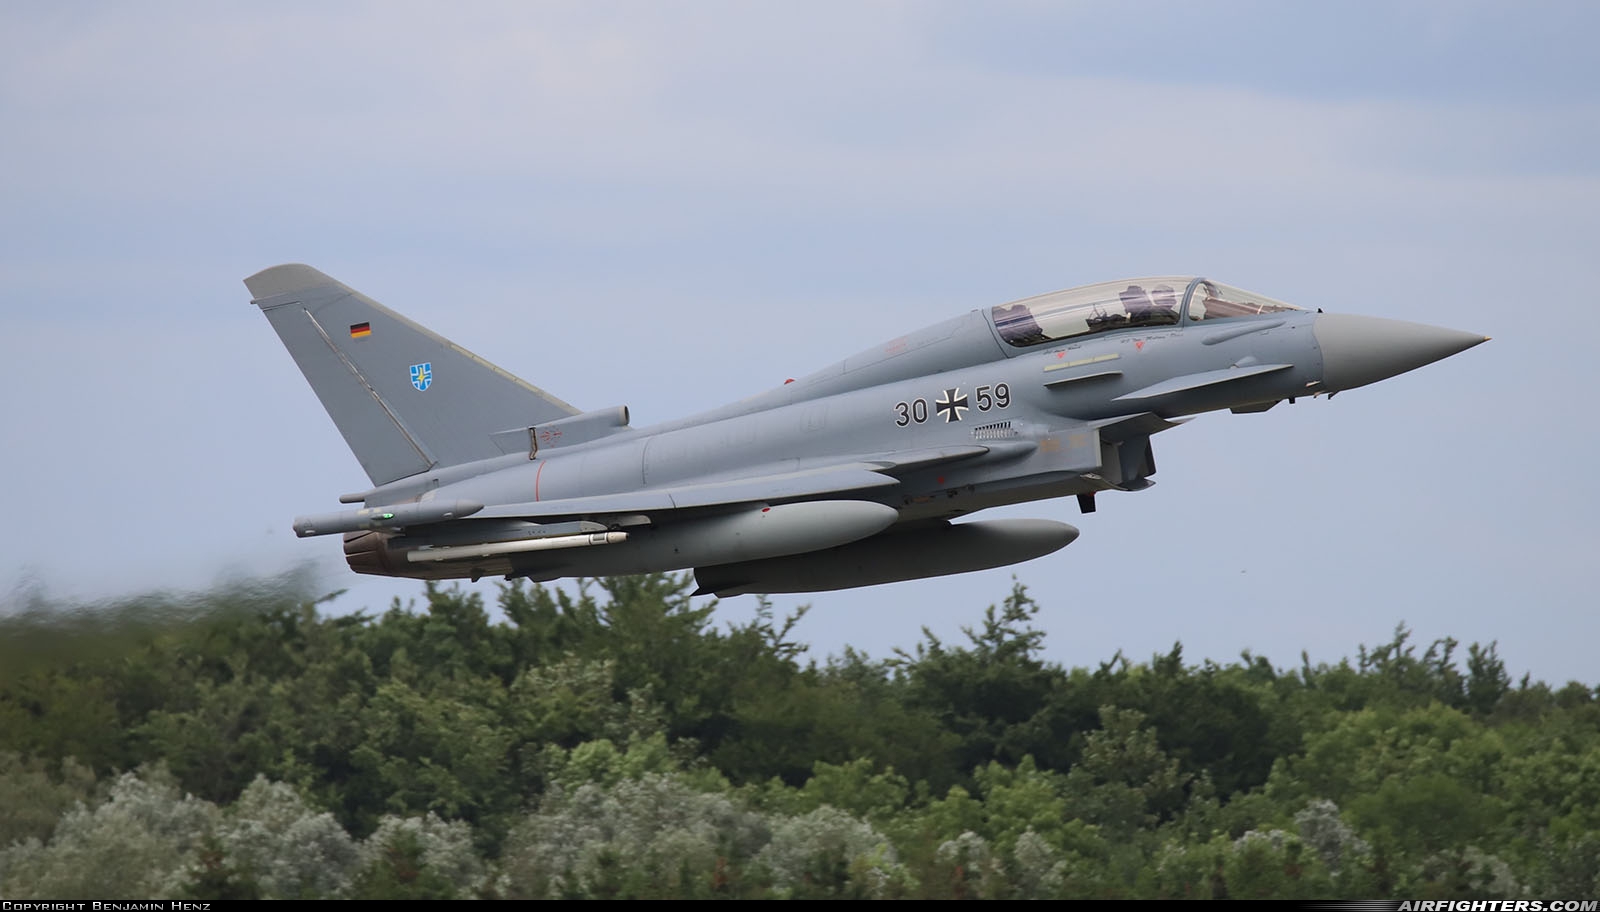 Germany - Air Force Eurofighter EF-2000 Typhoon T 30+59 at Rostock - Laage (RLG / ETNL), Germany